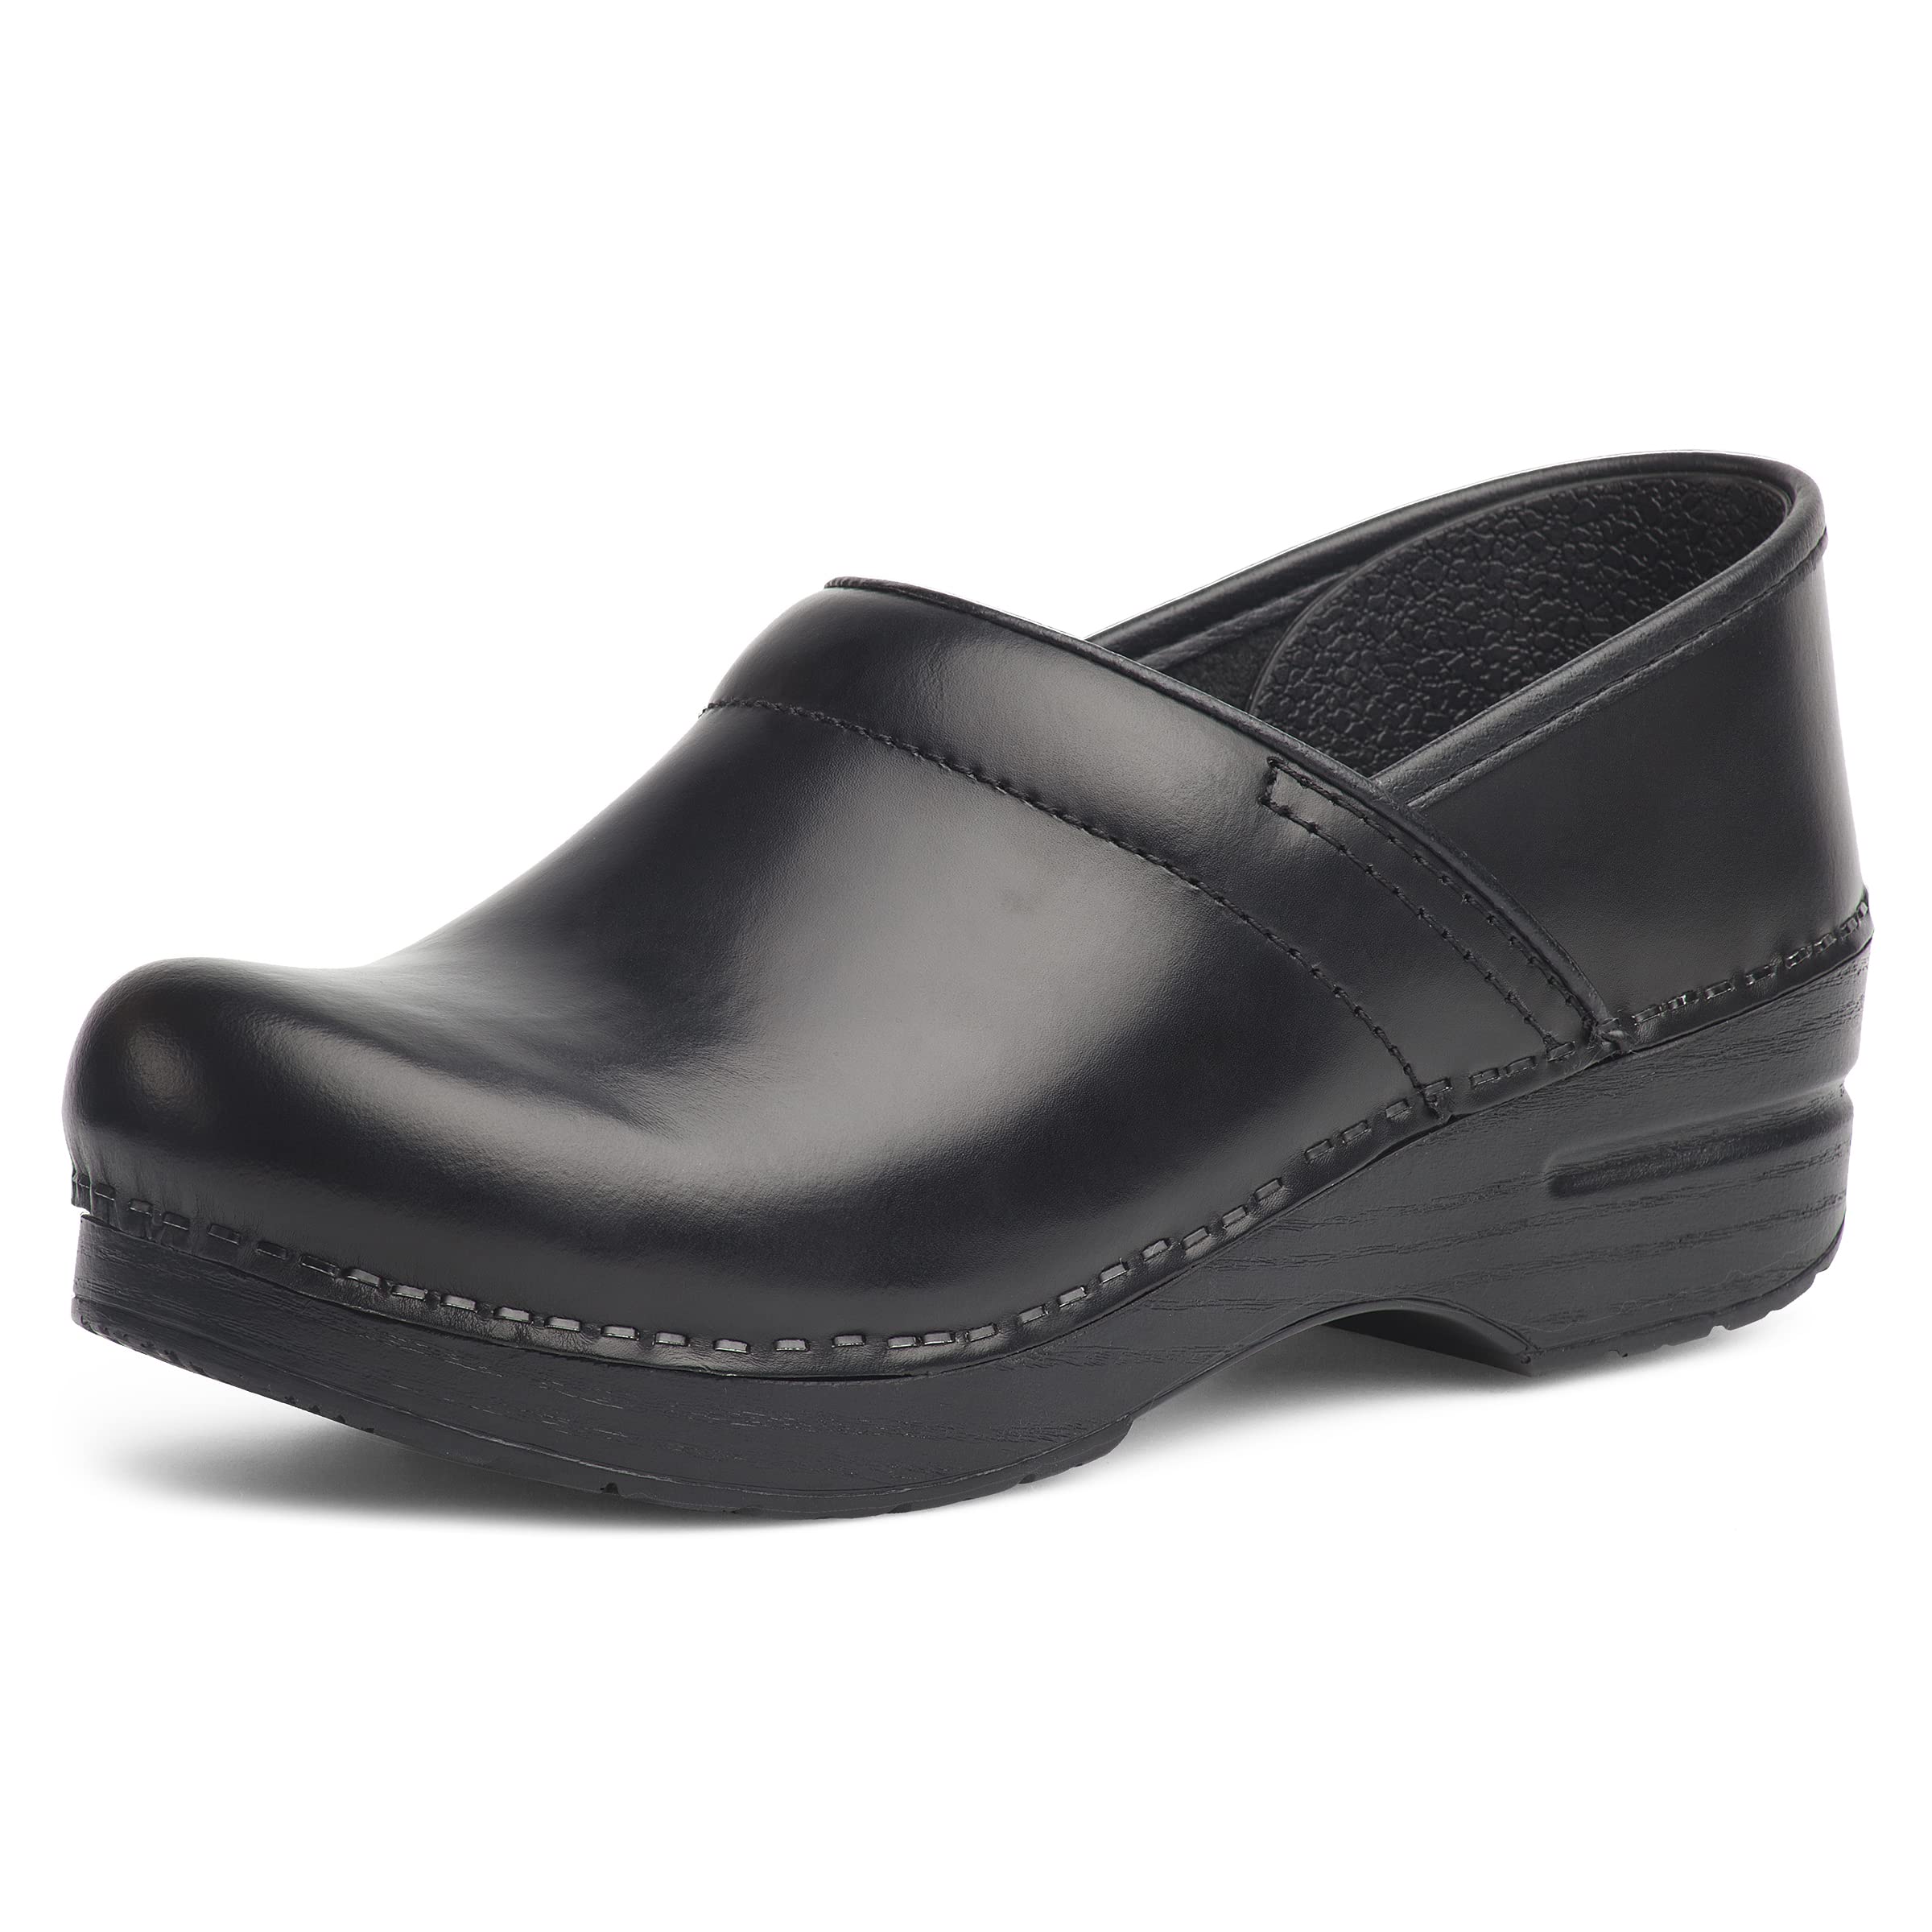 Dansko Professional Chrome Slip-On Clogs for Women - Rocker Sole and Arch Support for Comfort - Ideal for Long Standing Professionals - Food Service, Healthcare Professionals